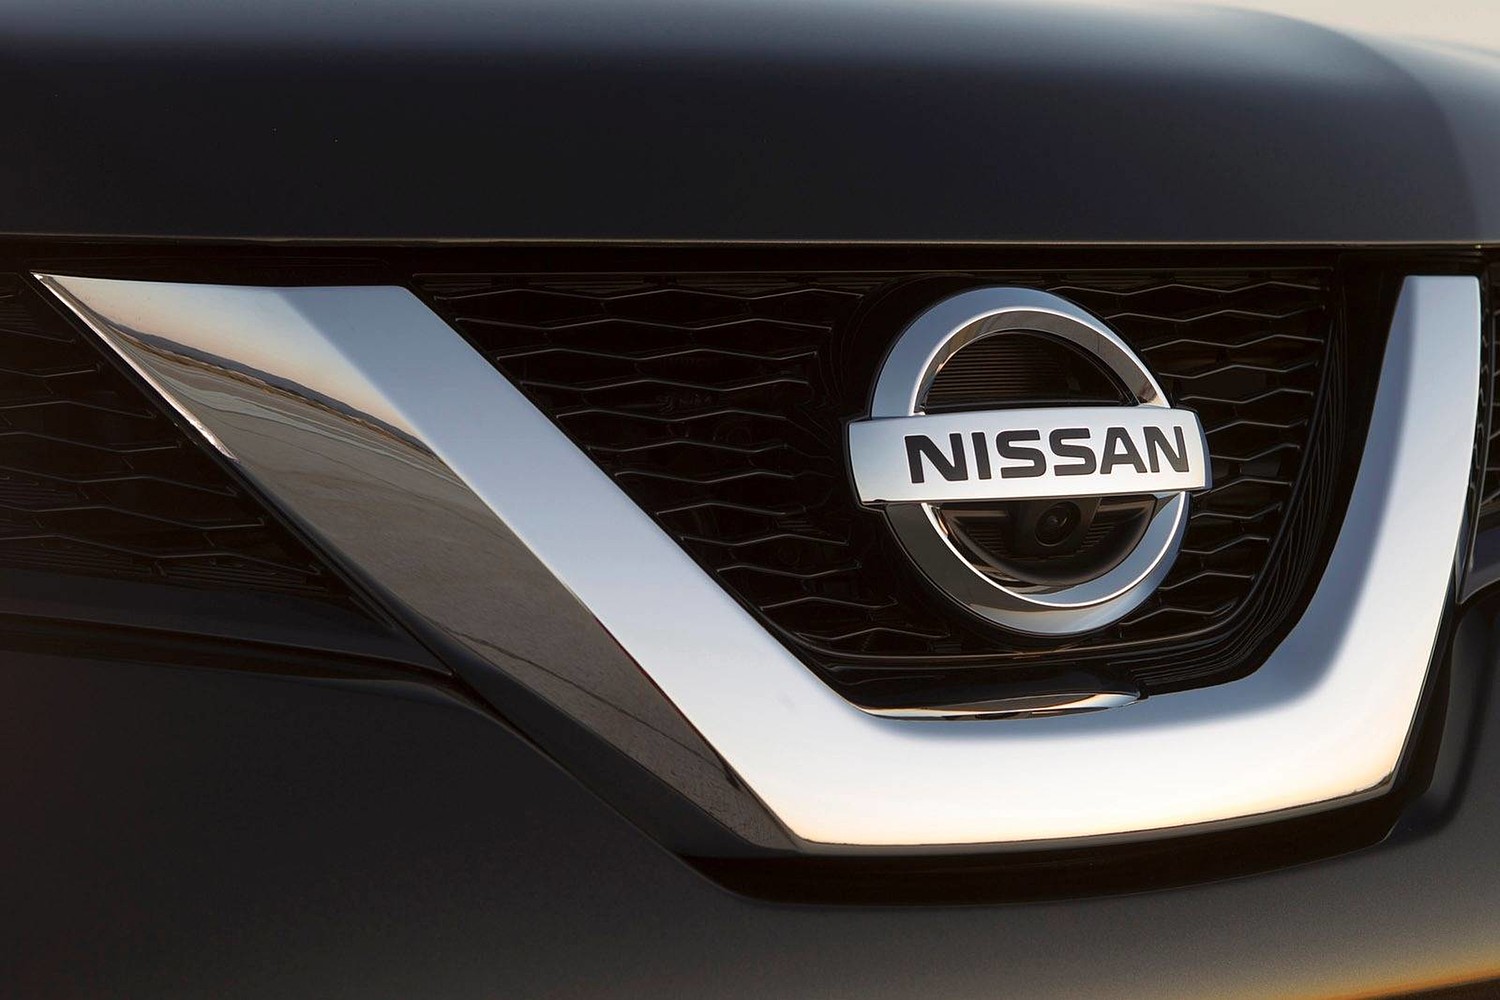 Nissan Rogue SL 4dr SUV Front Badge (2014 model year shown)